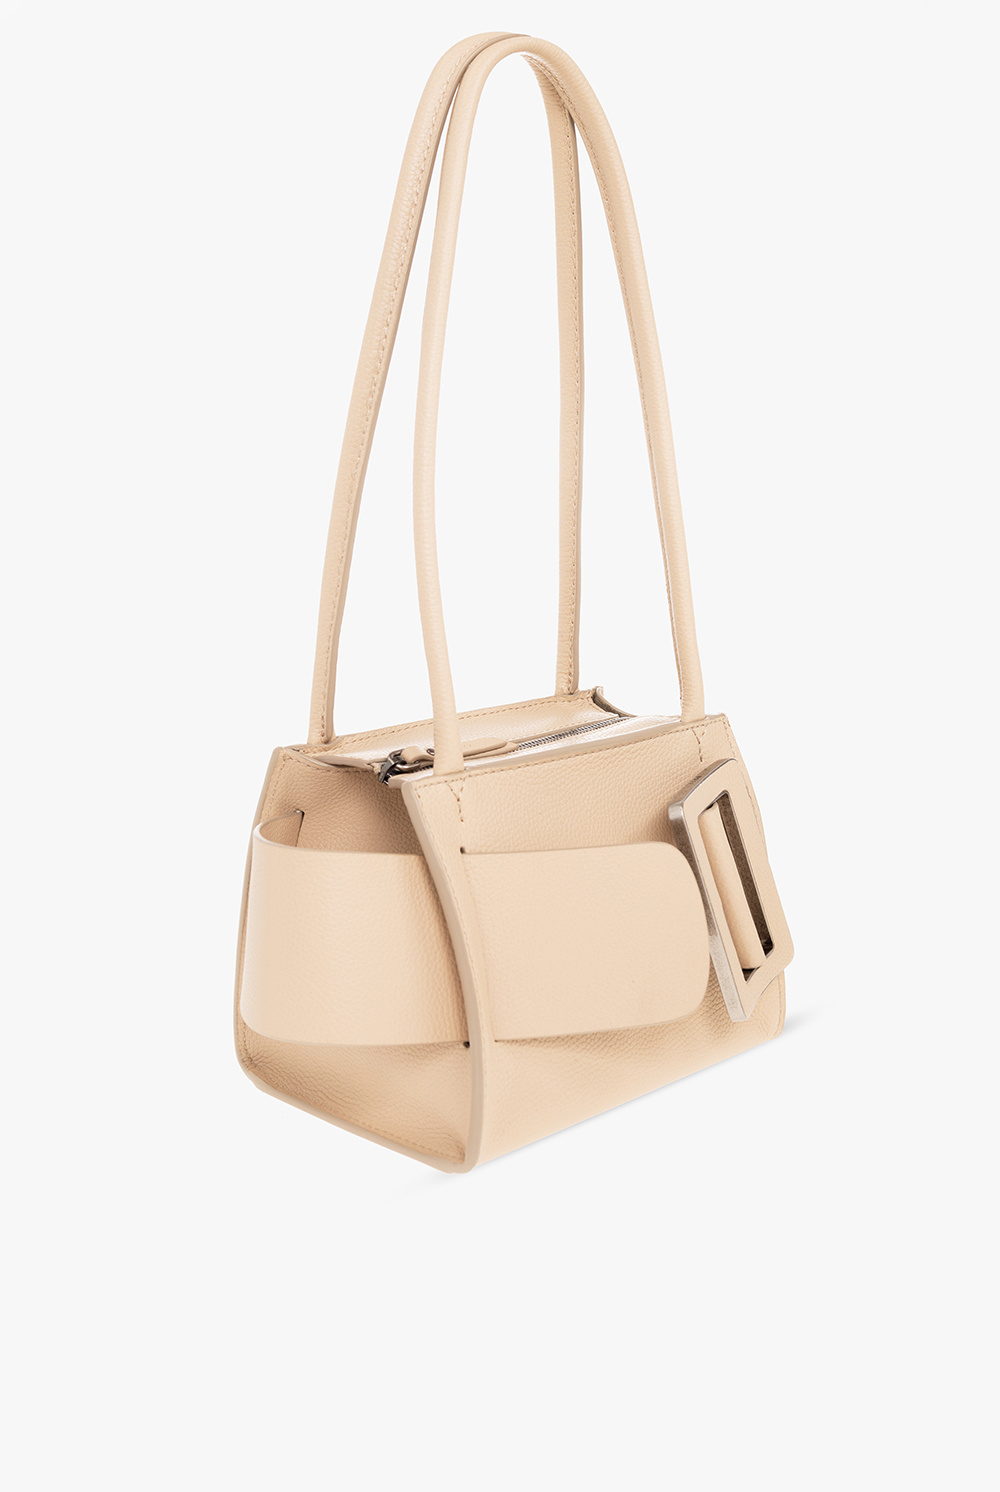 Bobby 18 Boyy Accessories_Clothing Bags Beige